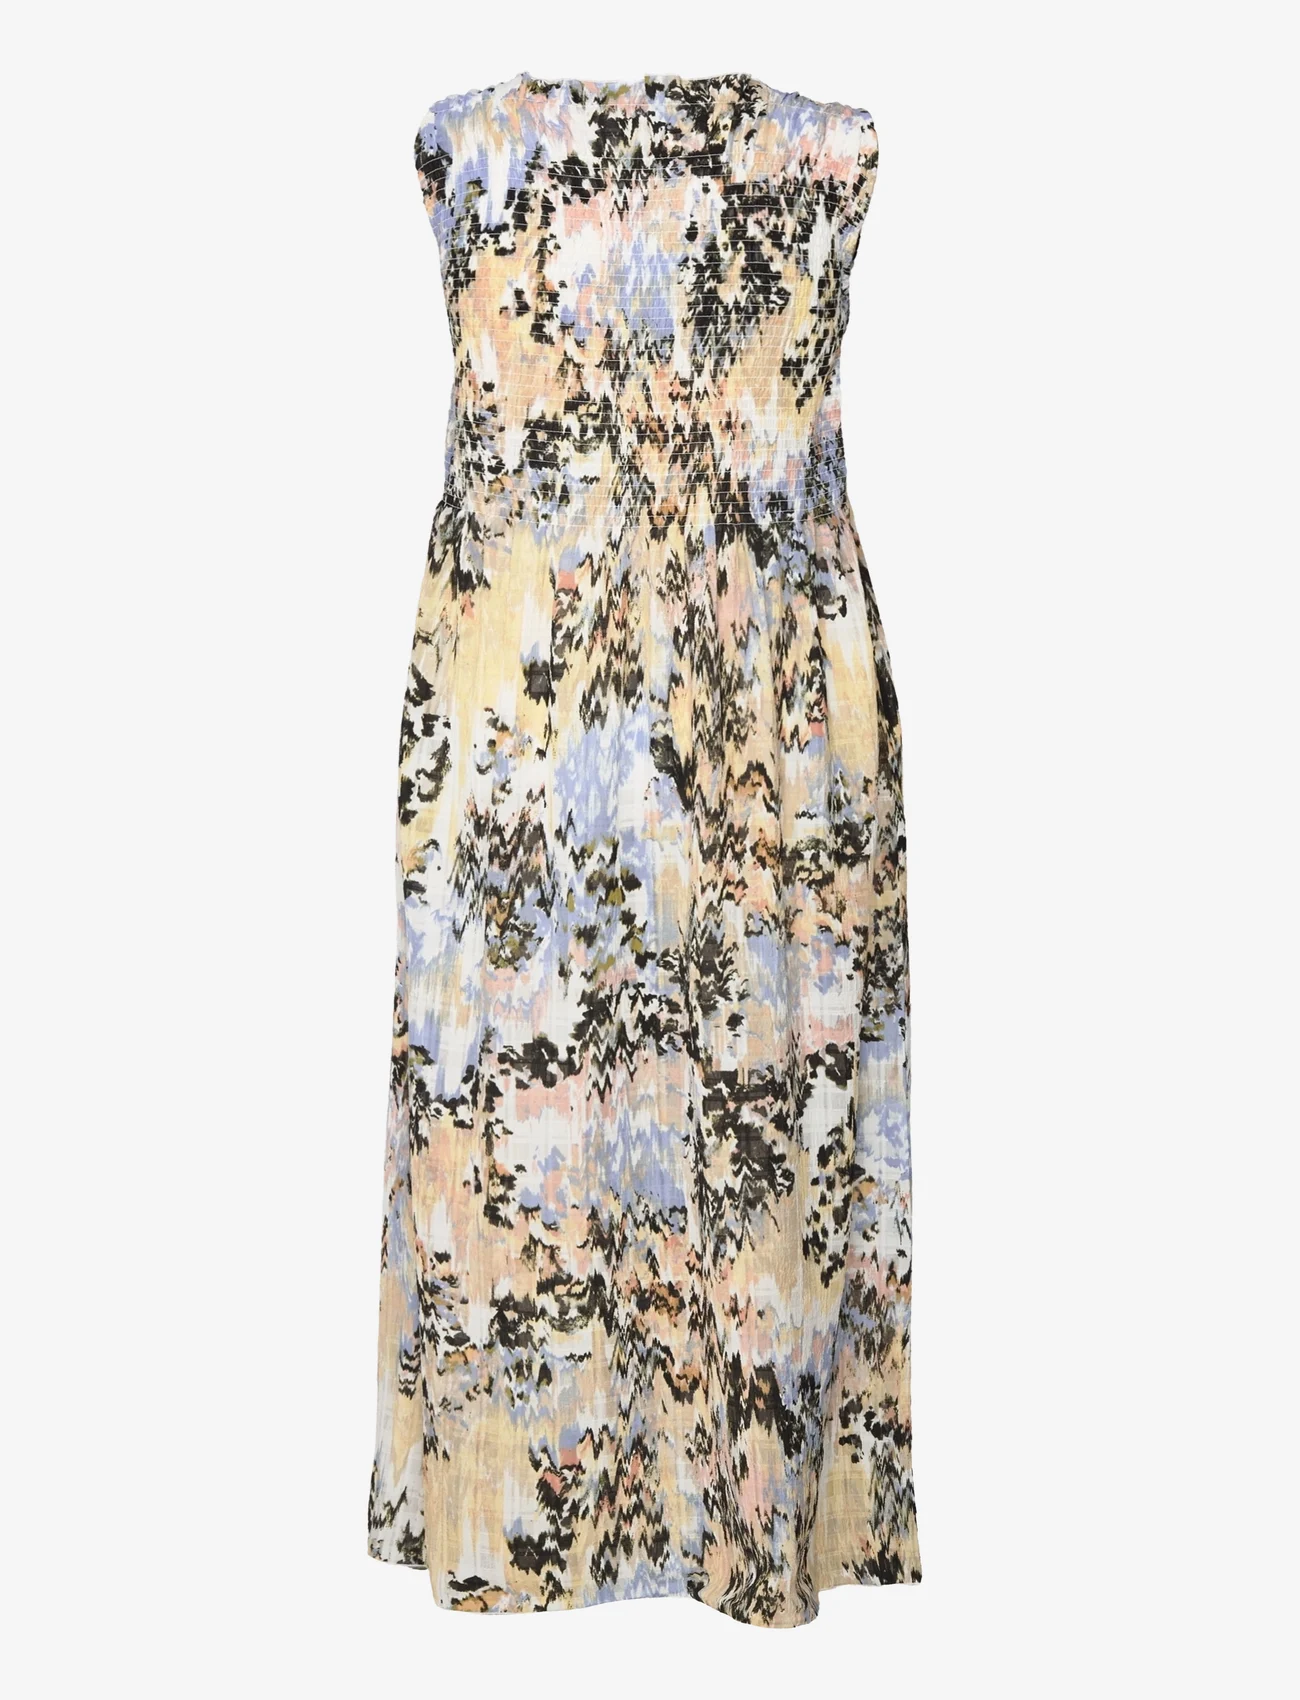 Soaked in Luxury - SLOlympia Dress - maxi dresses - parsnip abstract print - 1